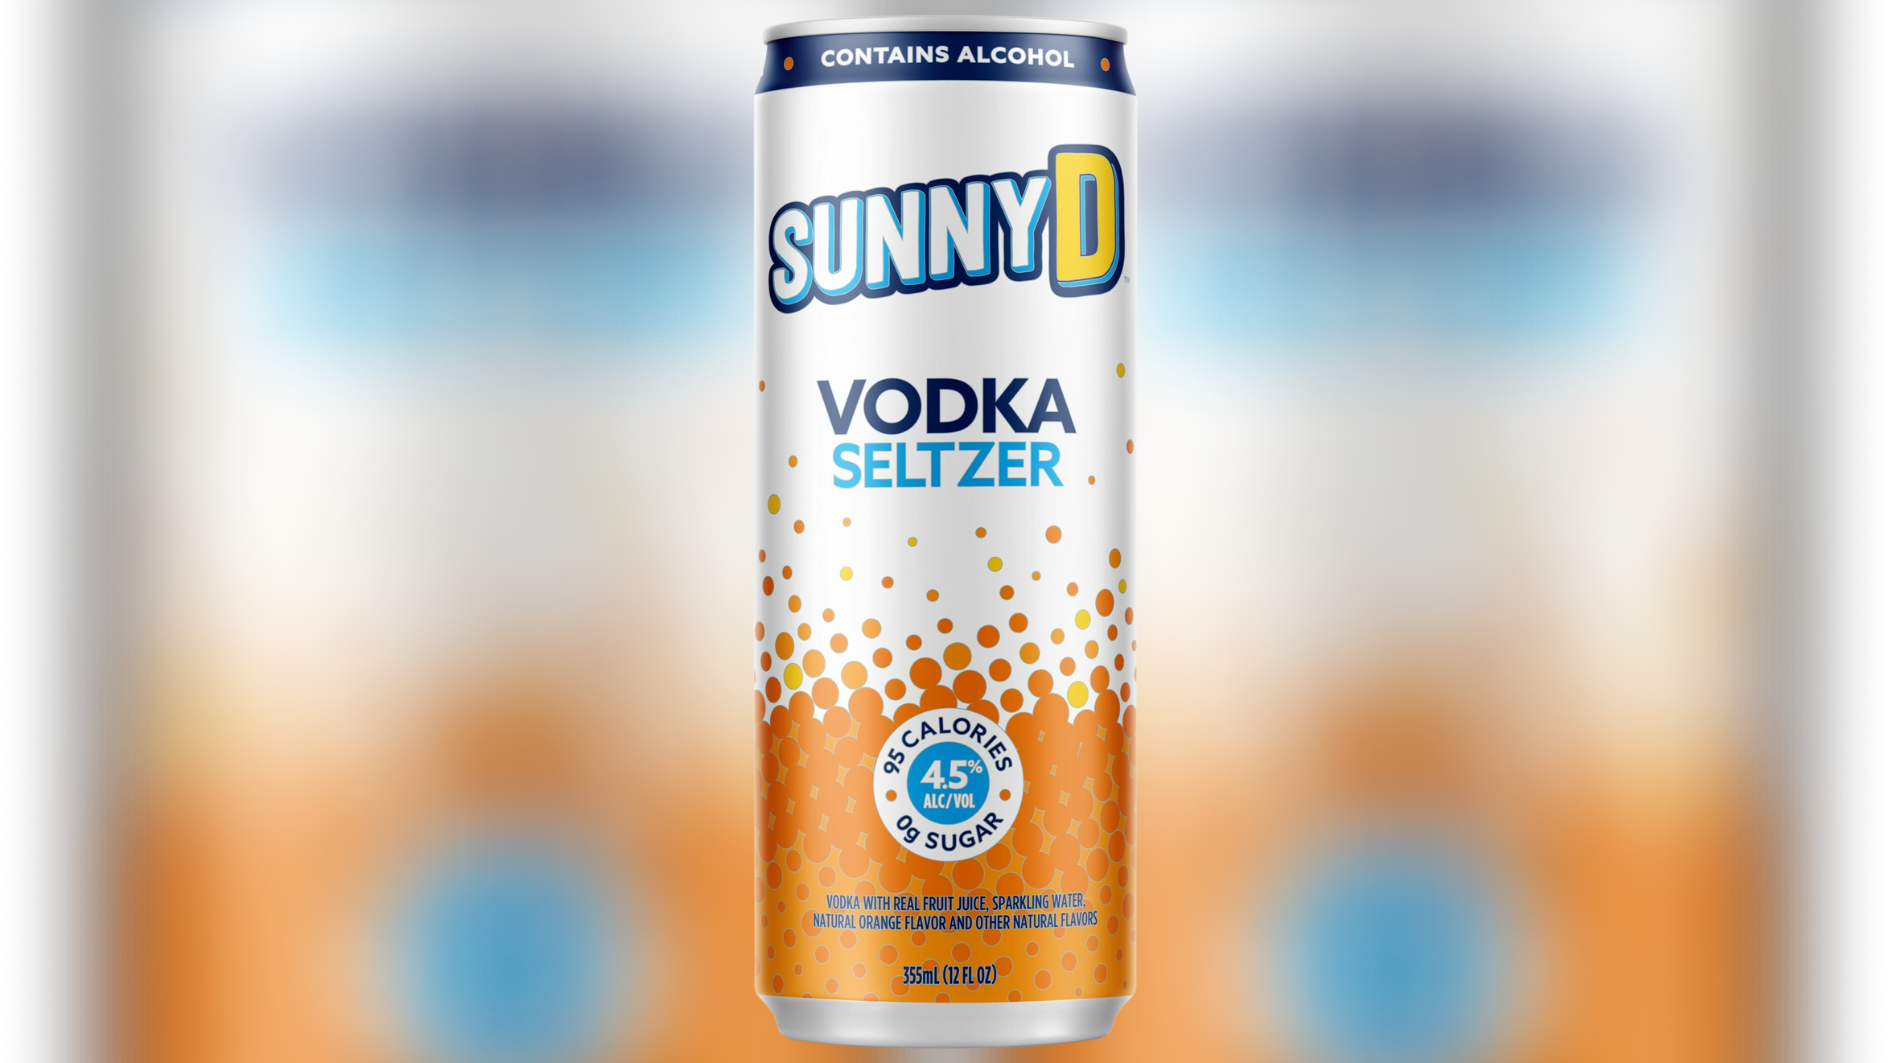 SunnyD uses bold, tangy flavor in new drink just for adults